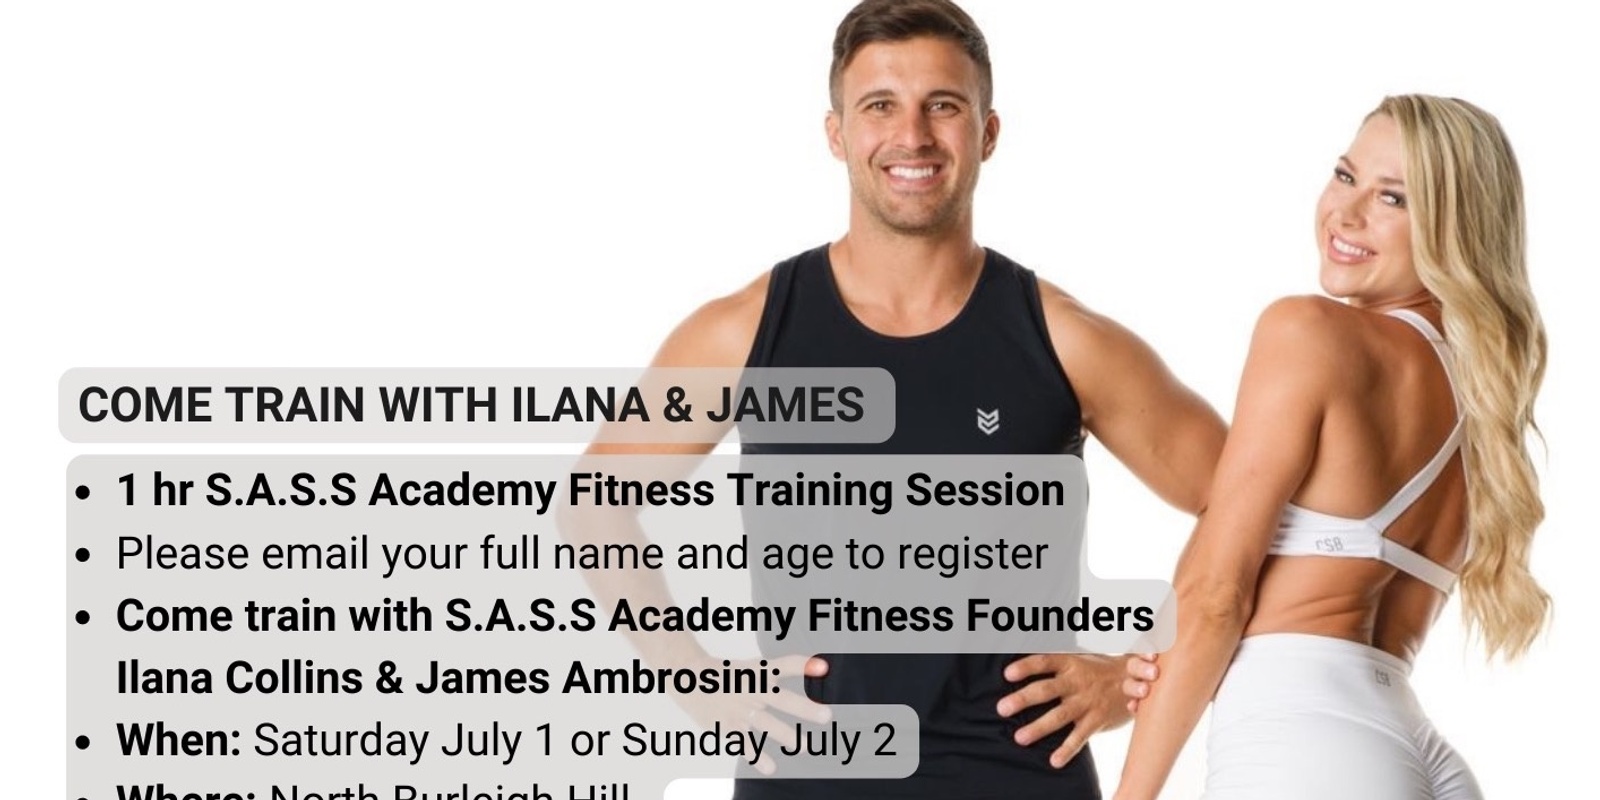 Banner image for S.A.S.S Academy Fitness - Free Training Session